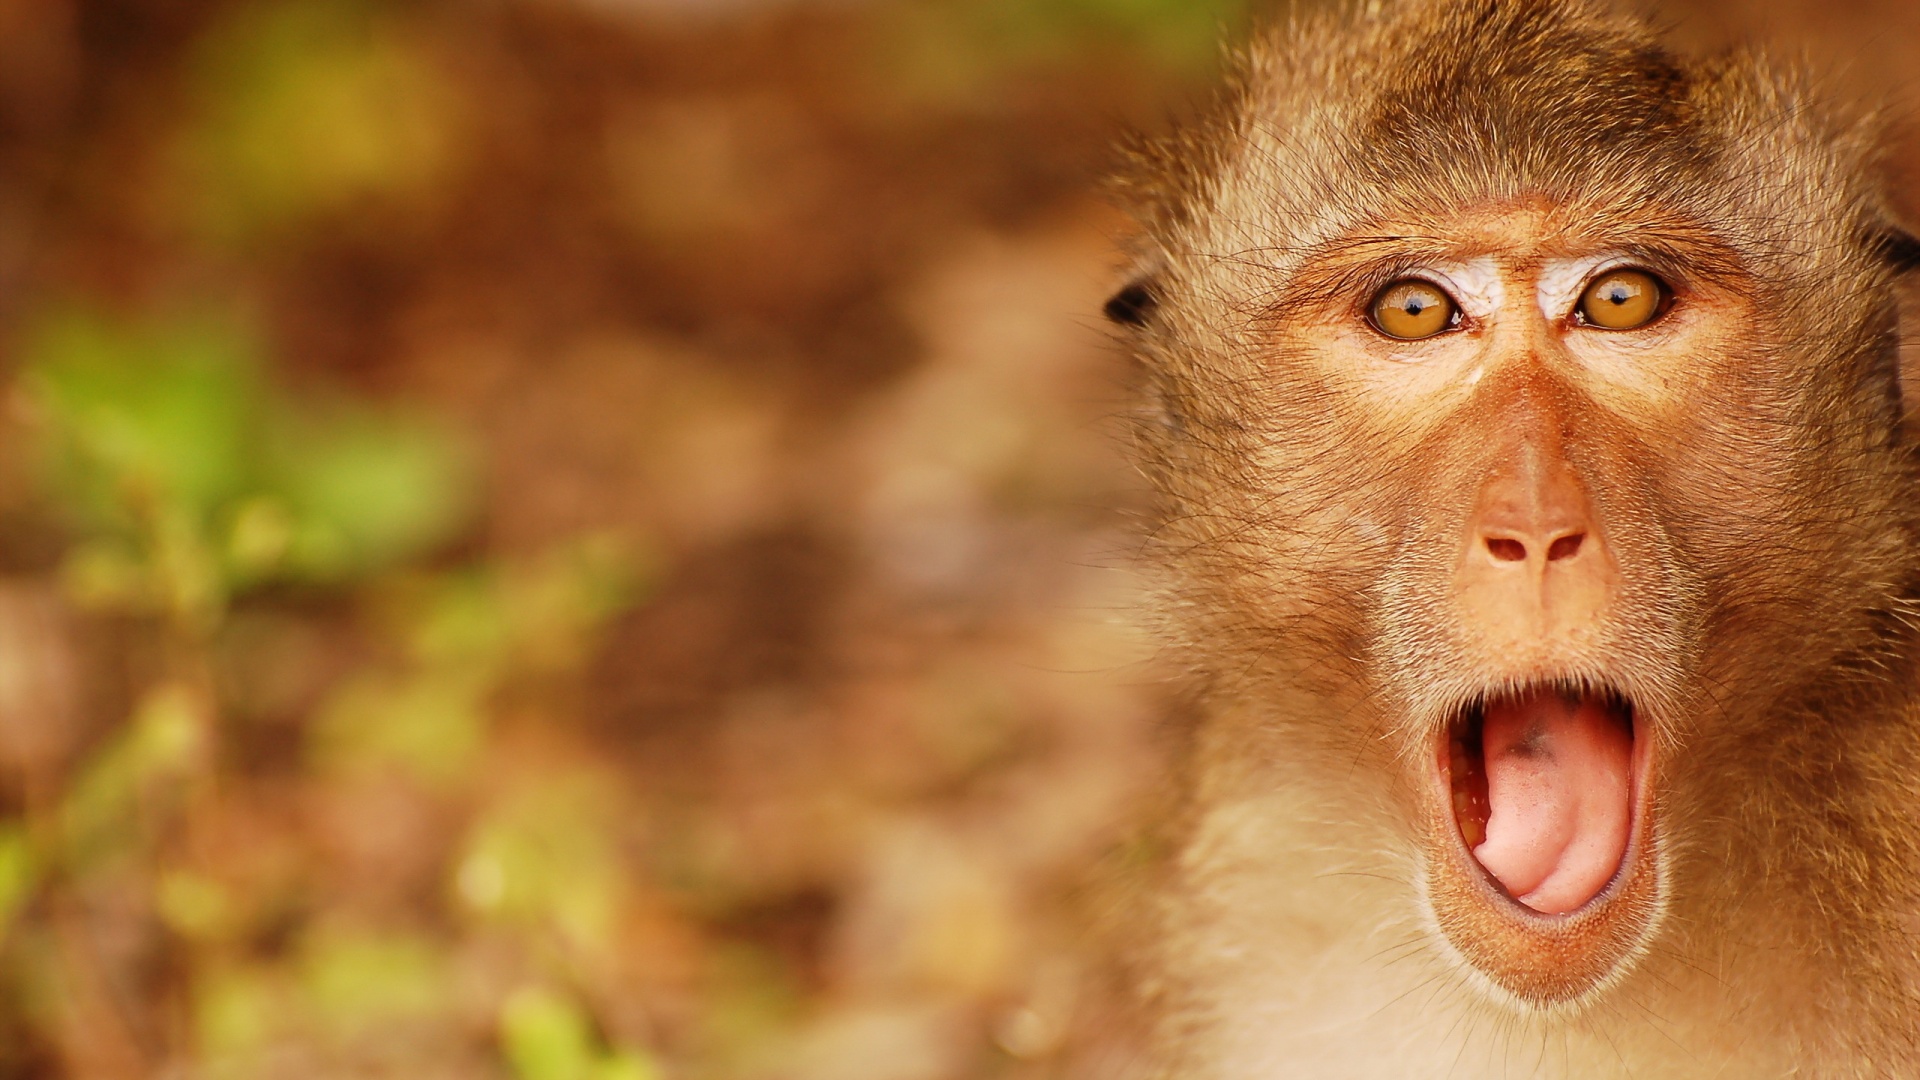 Top 10 Monkey Wallpaper and Beautiful Monkey Themes | All for ...